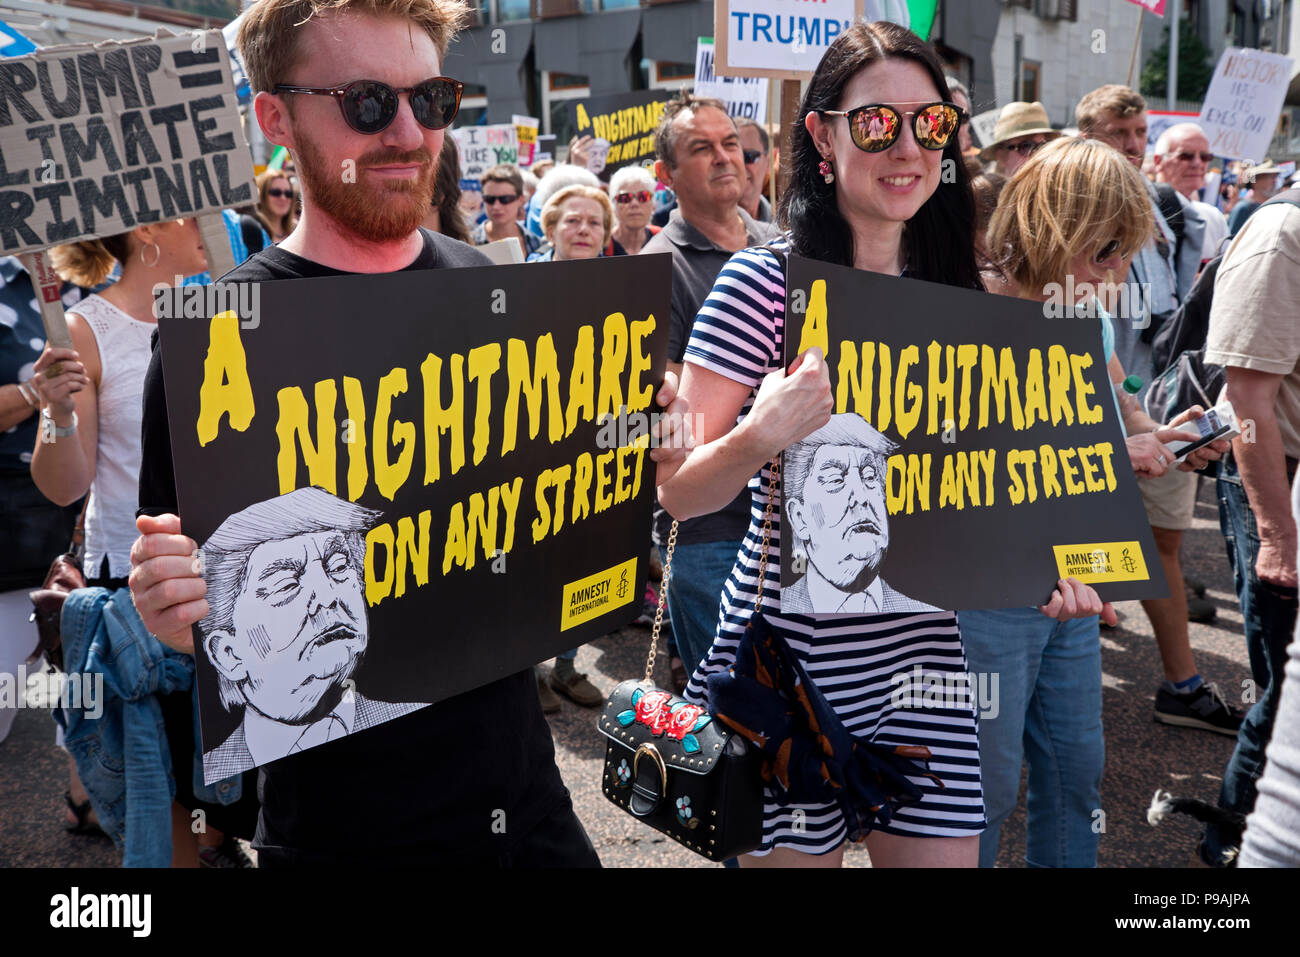 Demonstrators in Edinburgh protesting against the visit of Donald Trump to the UK, 14th July 2018. Stock Photo